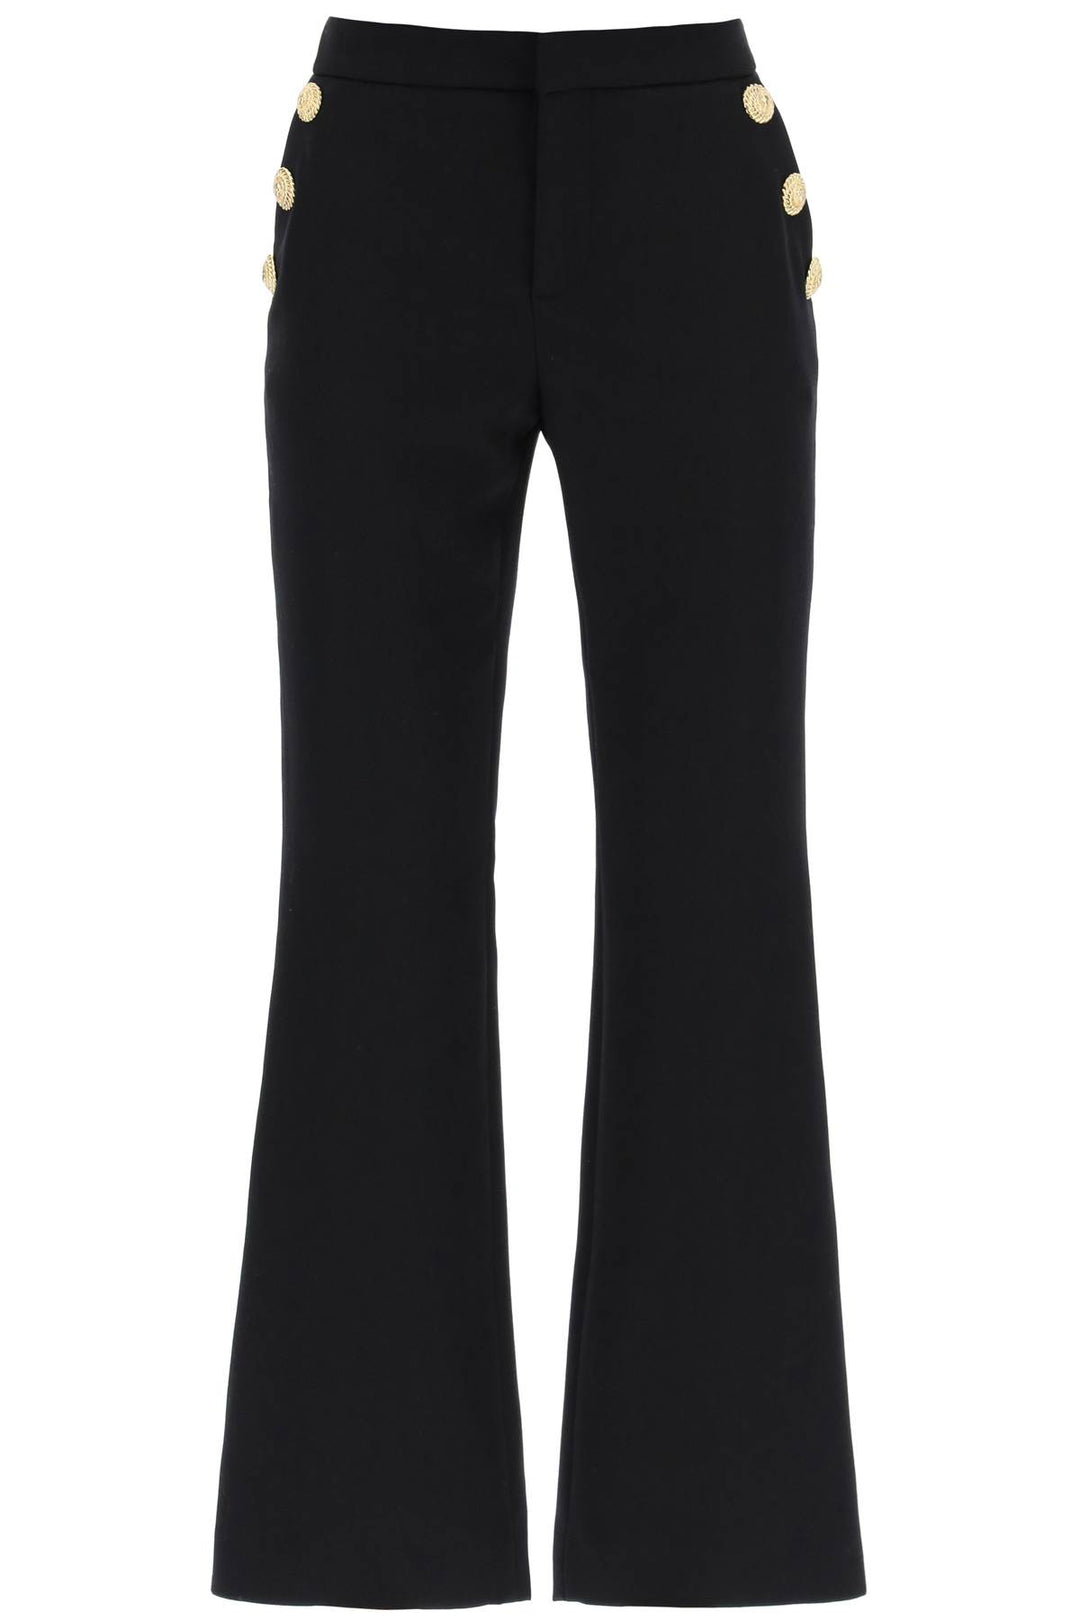 Balmain Flared Pants With Embossed Buttons   Nero